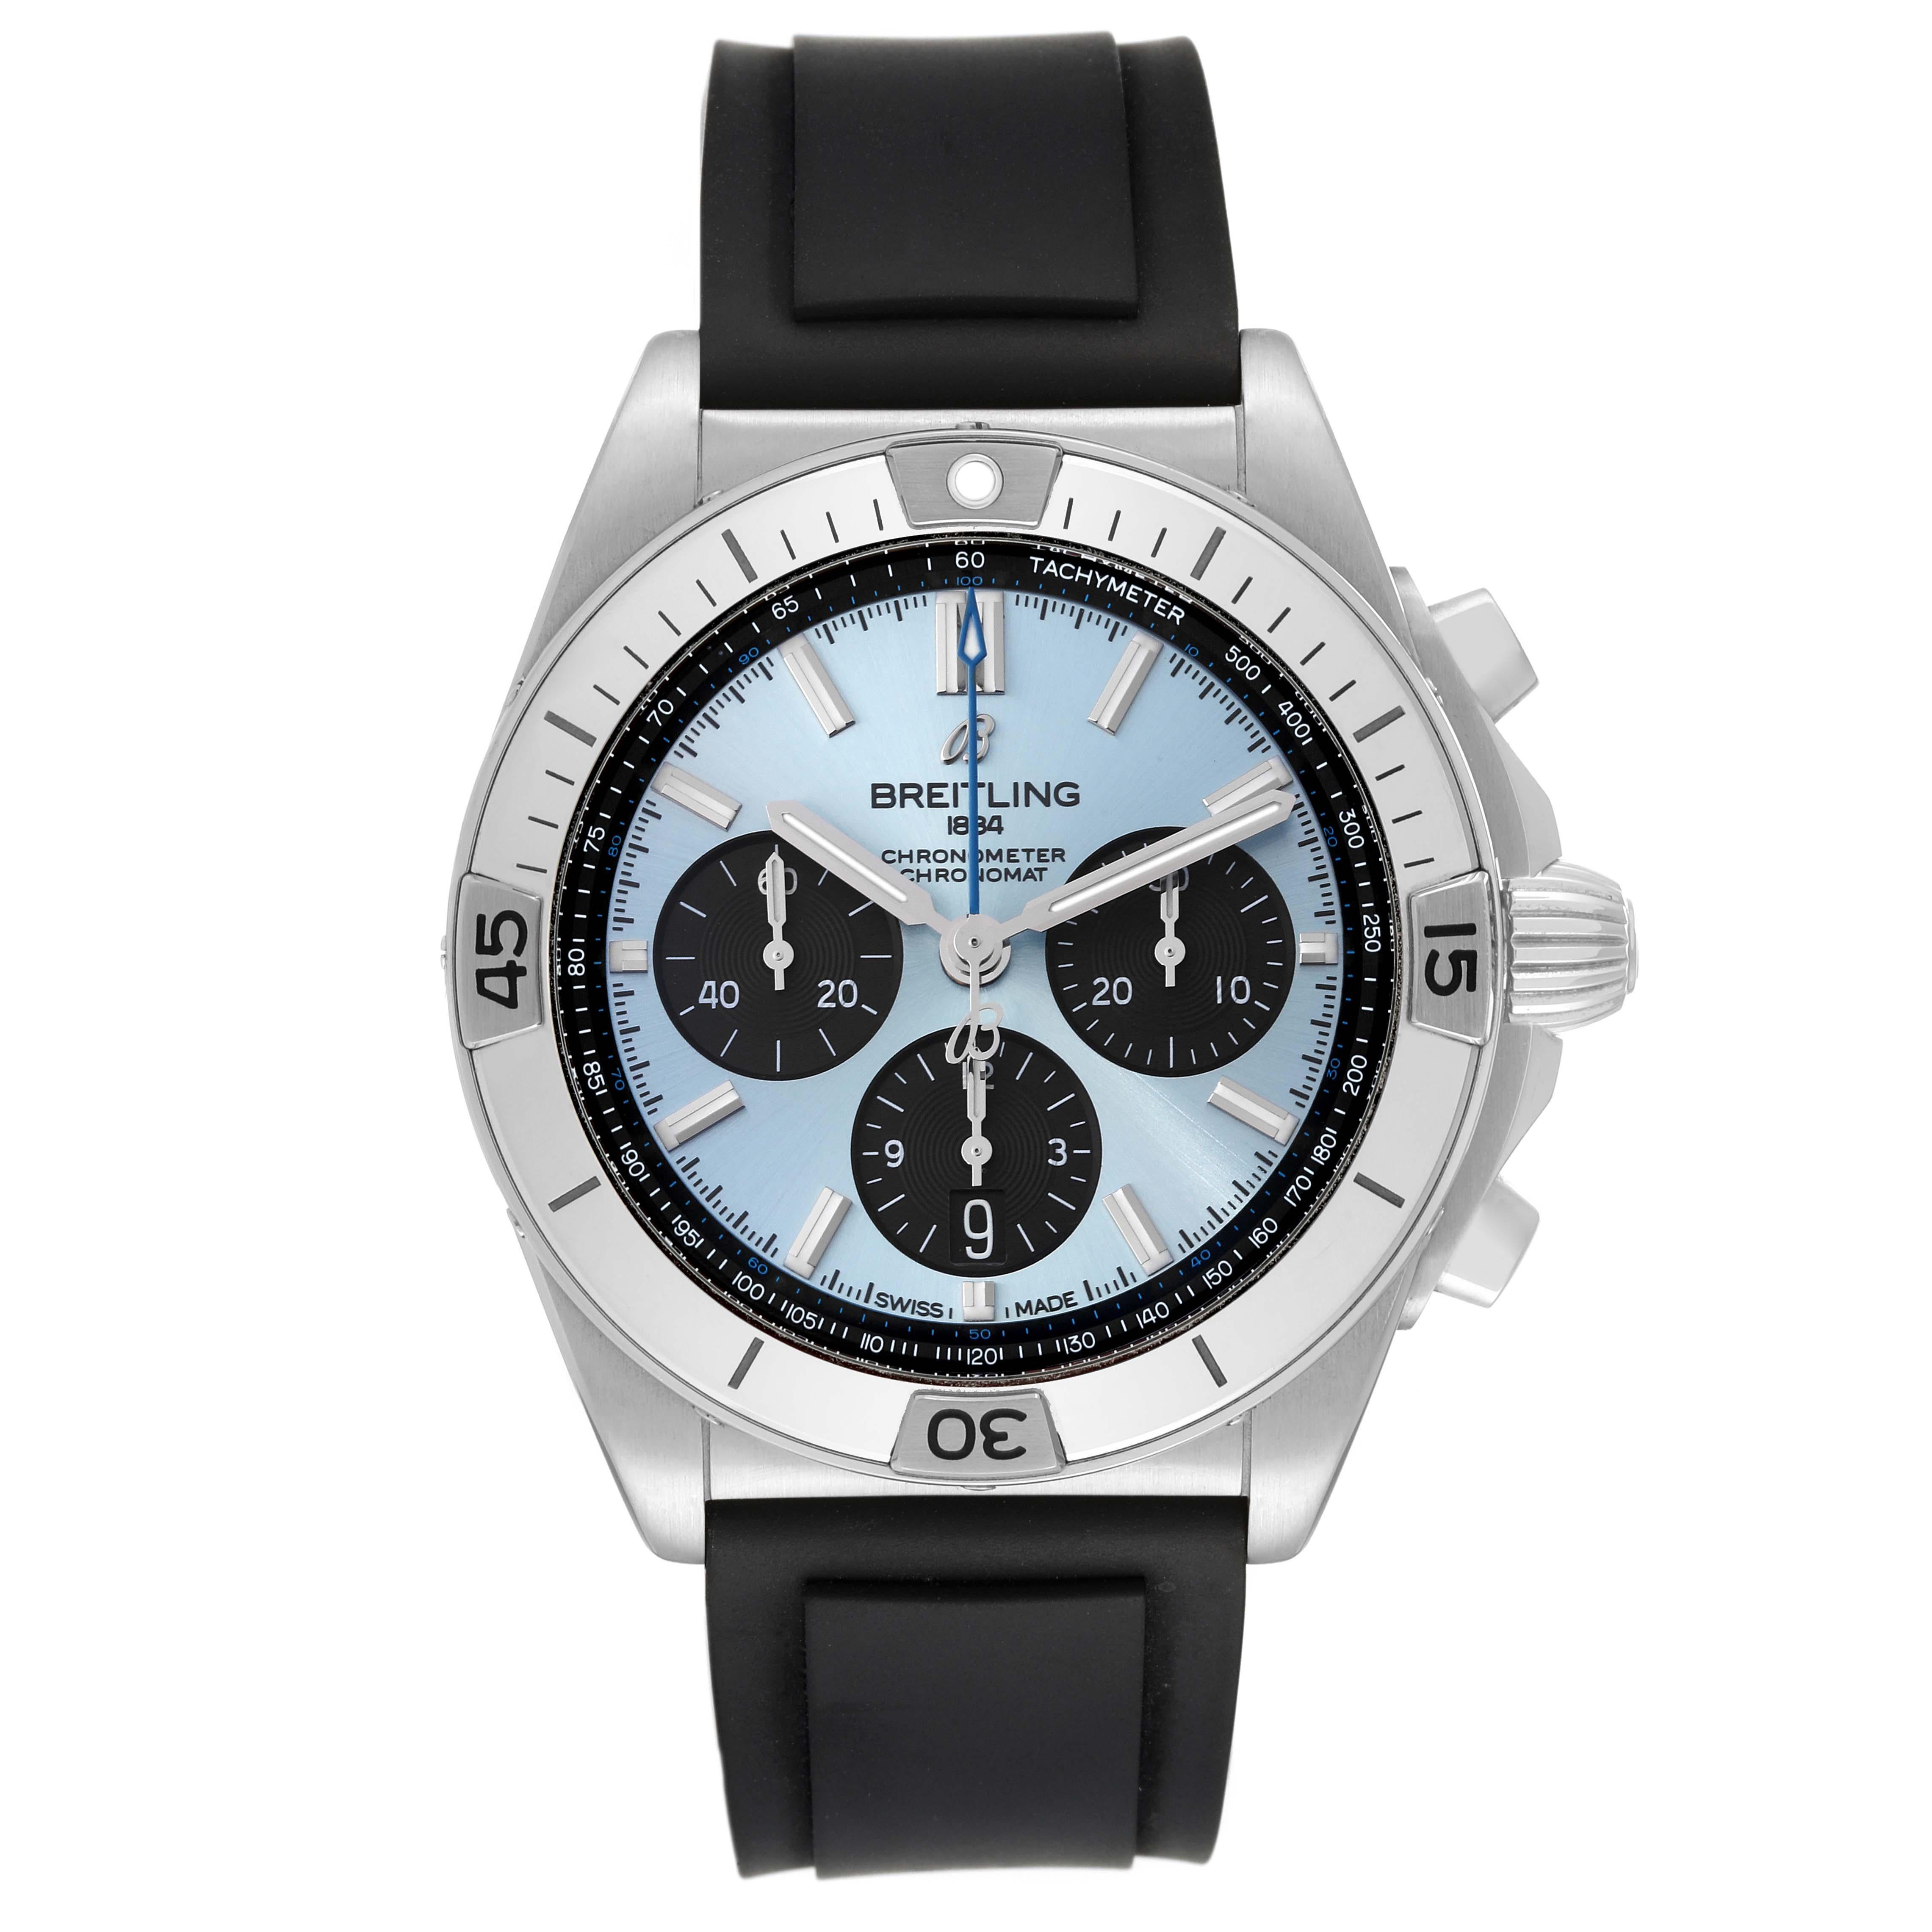 Breitling Chronomat B01 Ice Blue Dial Steel Mens Watch PB0134 Box Card. Self-winding automatic officially certified chronometer movement. Chronograph function. Stainless steel case 42.0 mm in diameter with screwed down crown and pushers. Transparent